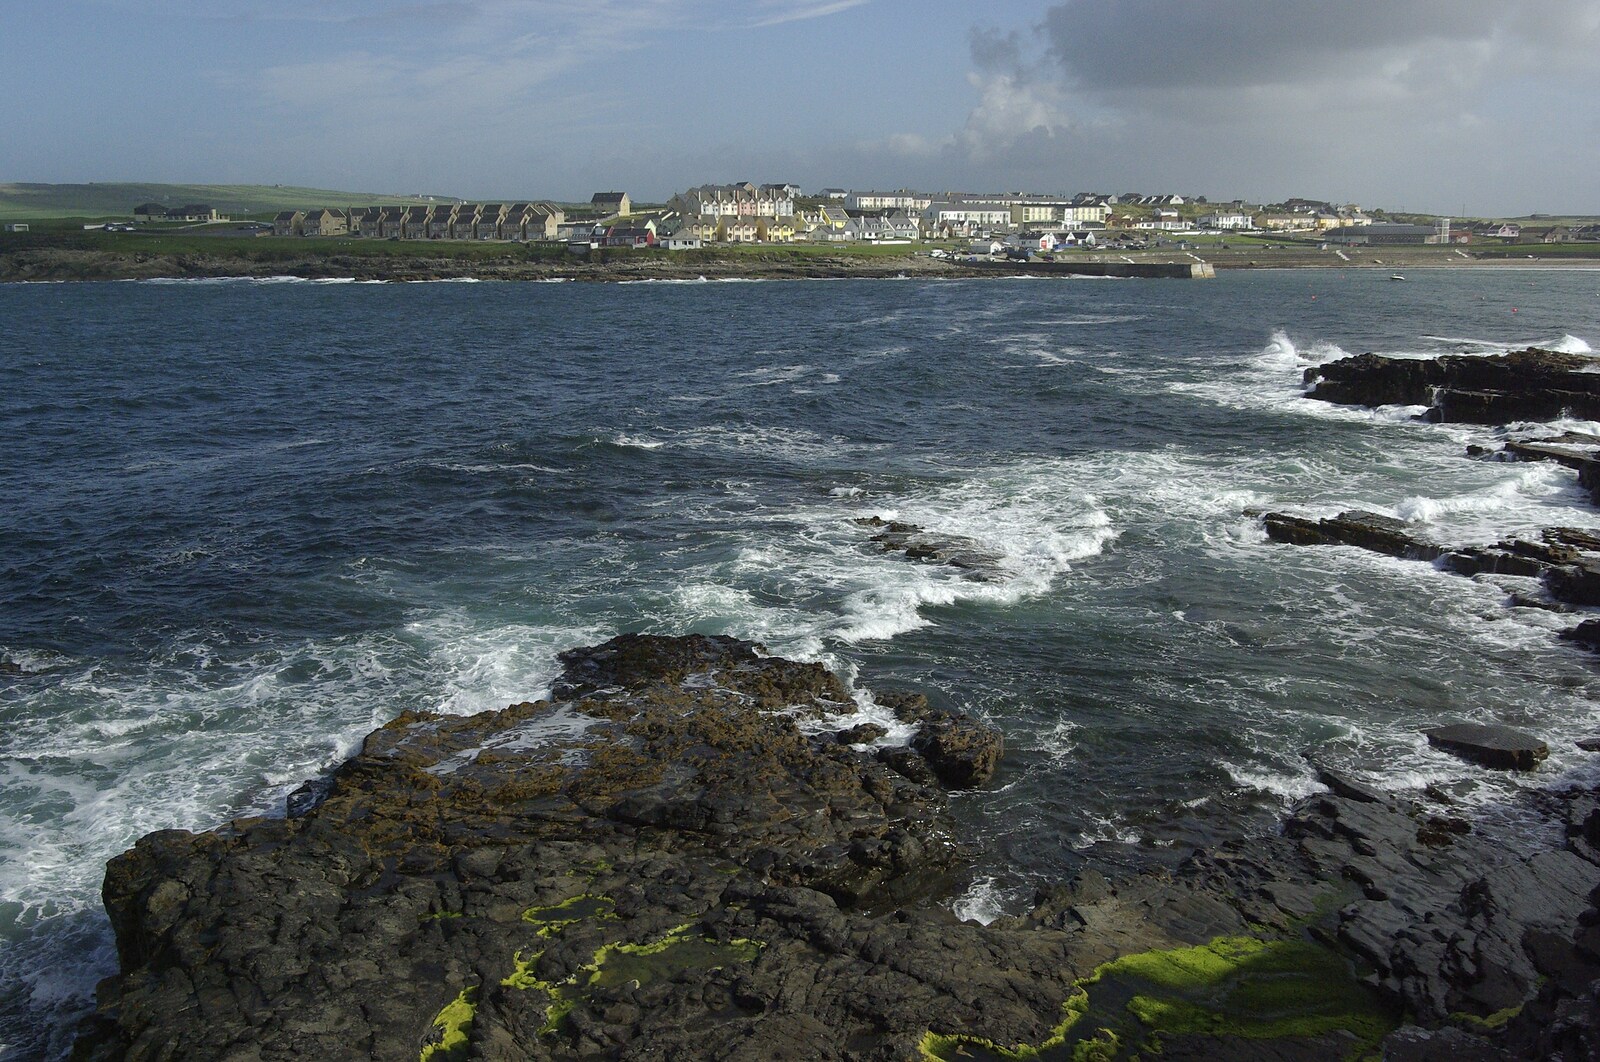 The town of Kilkee, from the rocks from 30th Birthday Party in Kilkee, County Clare, Ireland - 22nd September 2007